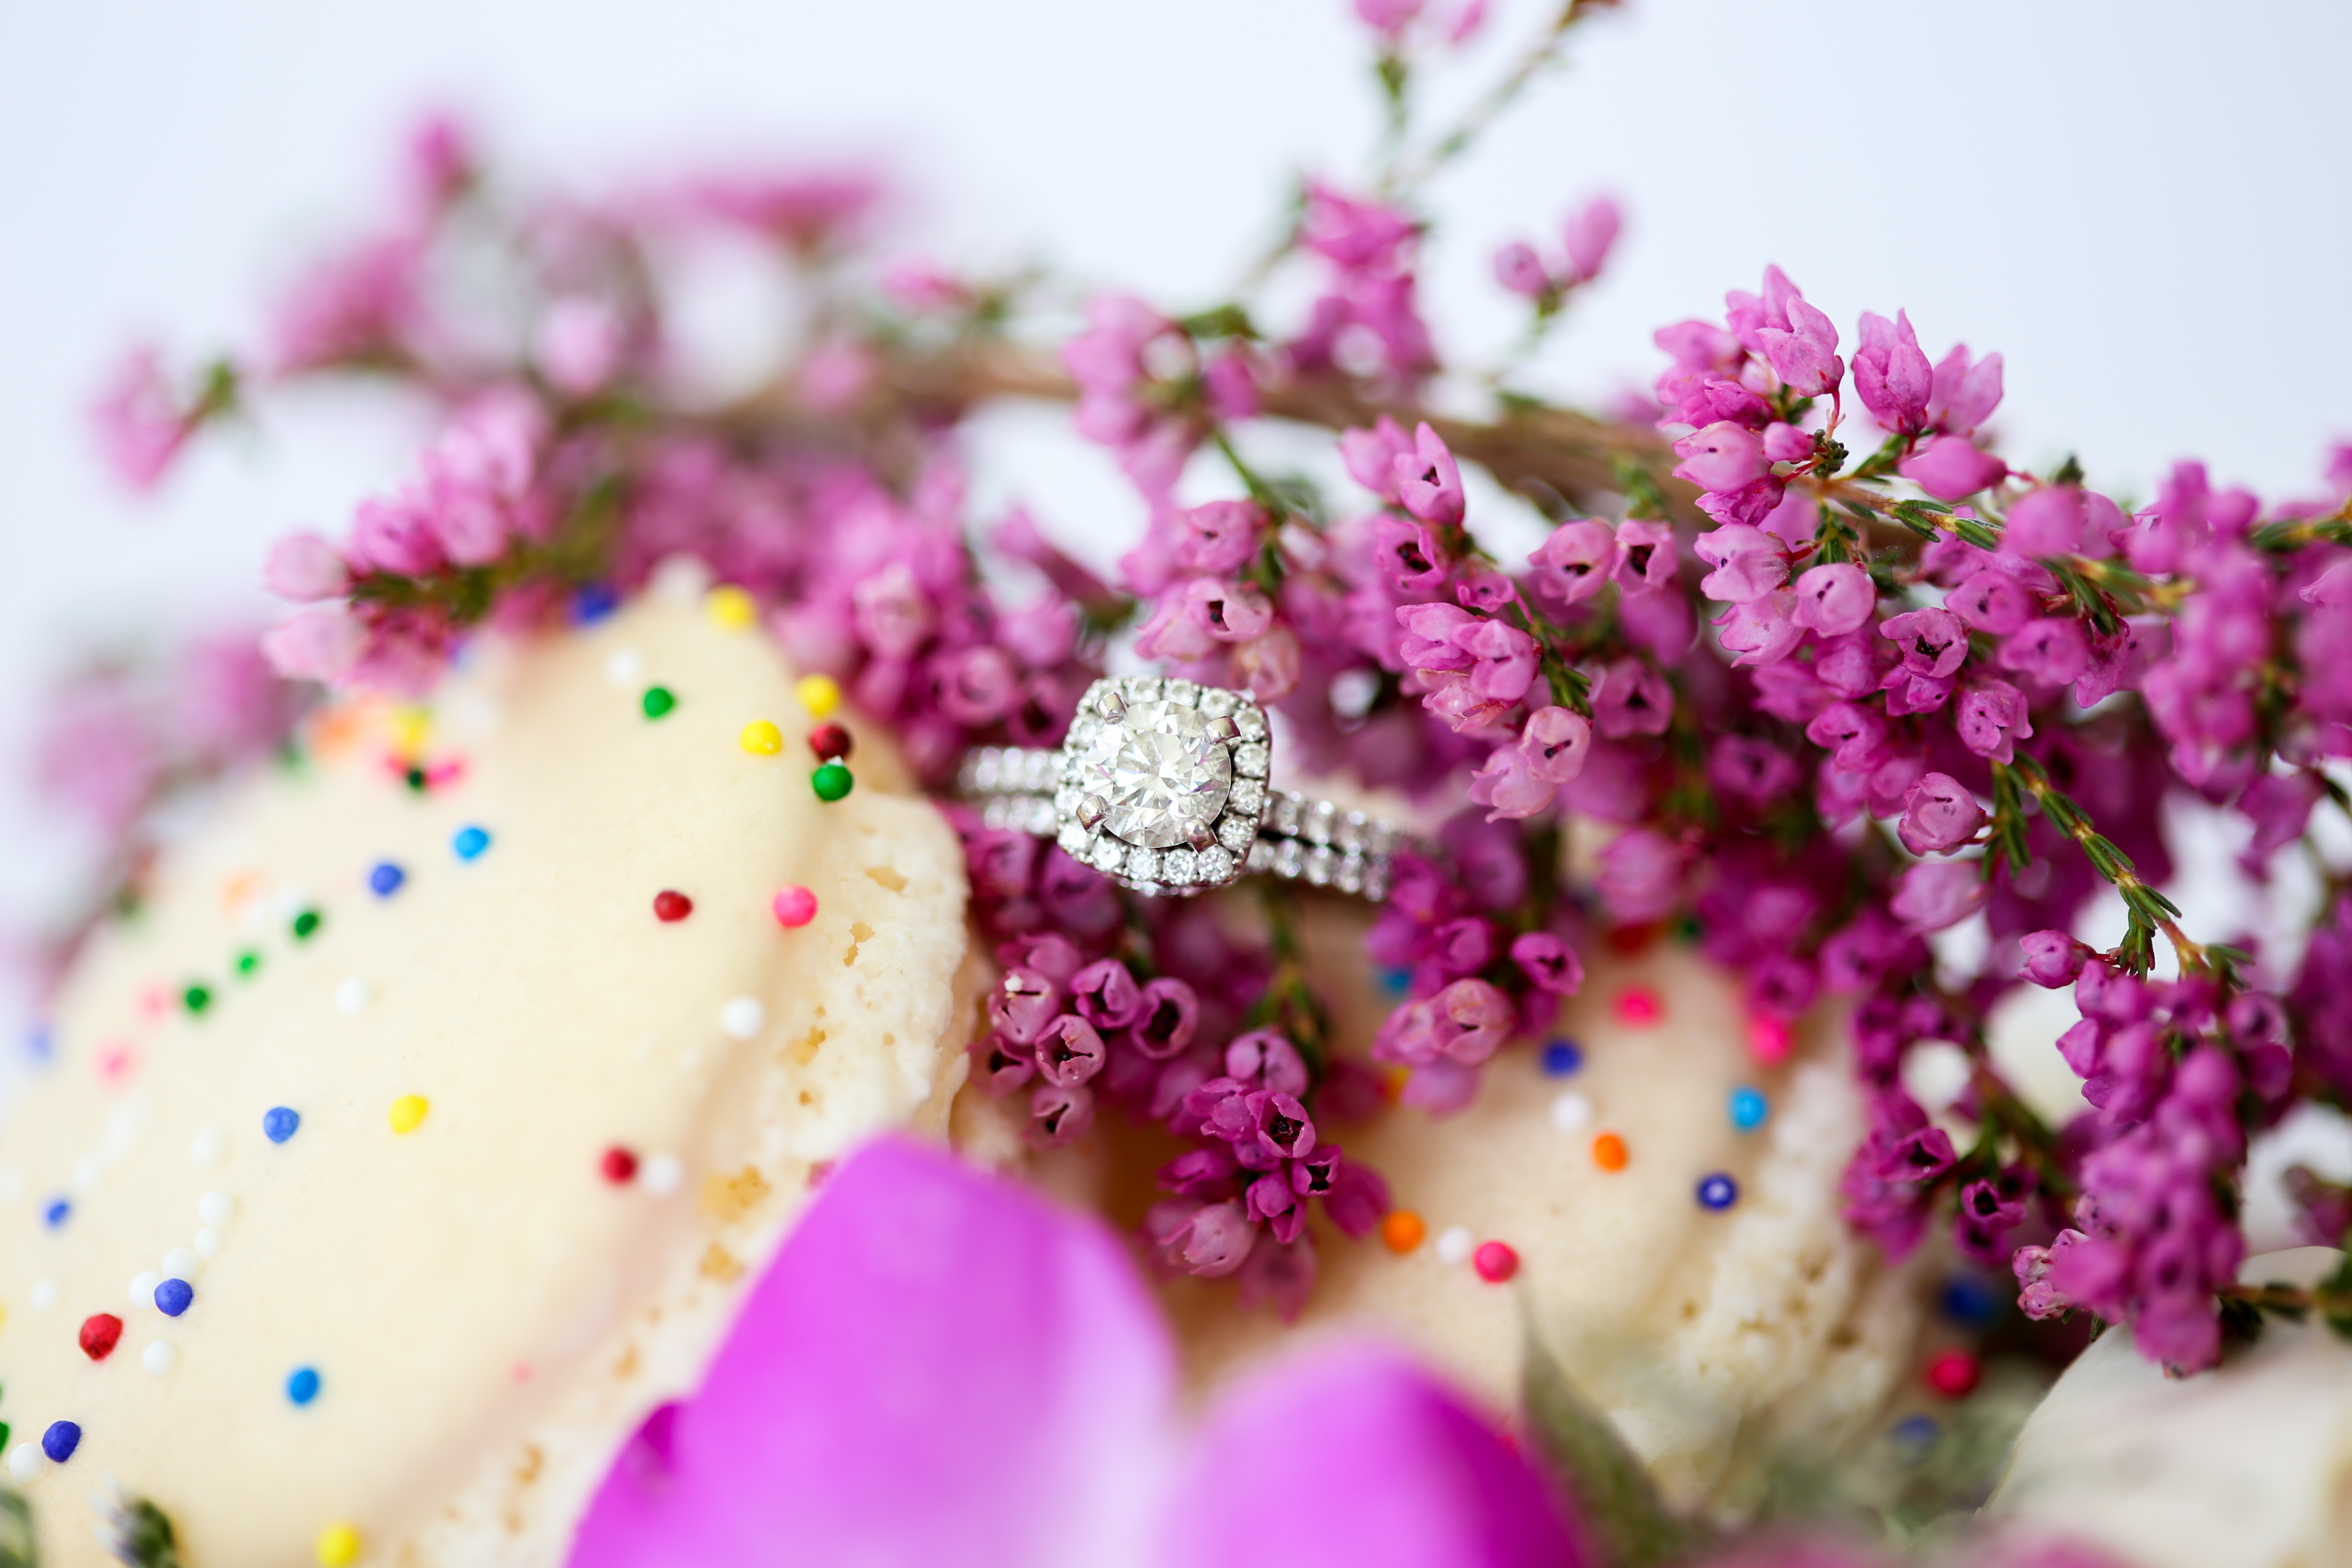 Ring on a macaroon - how to propose - tips for newly engaged couples - kansas city engagement photographer - wedding photographer overland park - mariam saifan photography - wedding planners